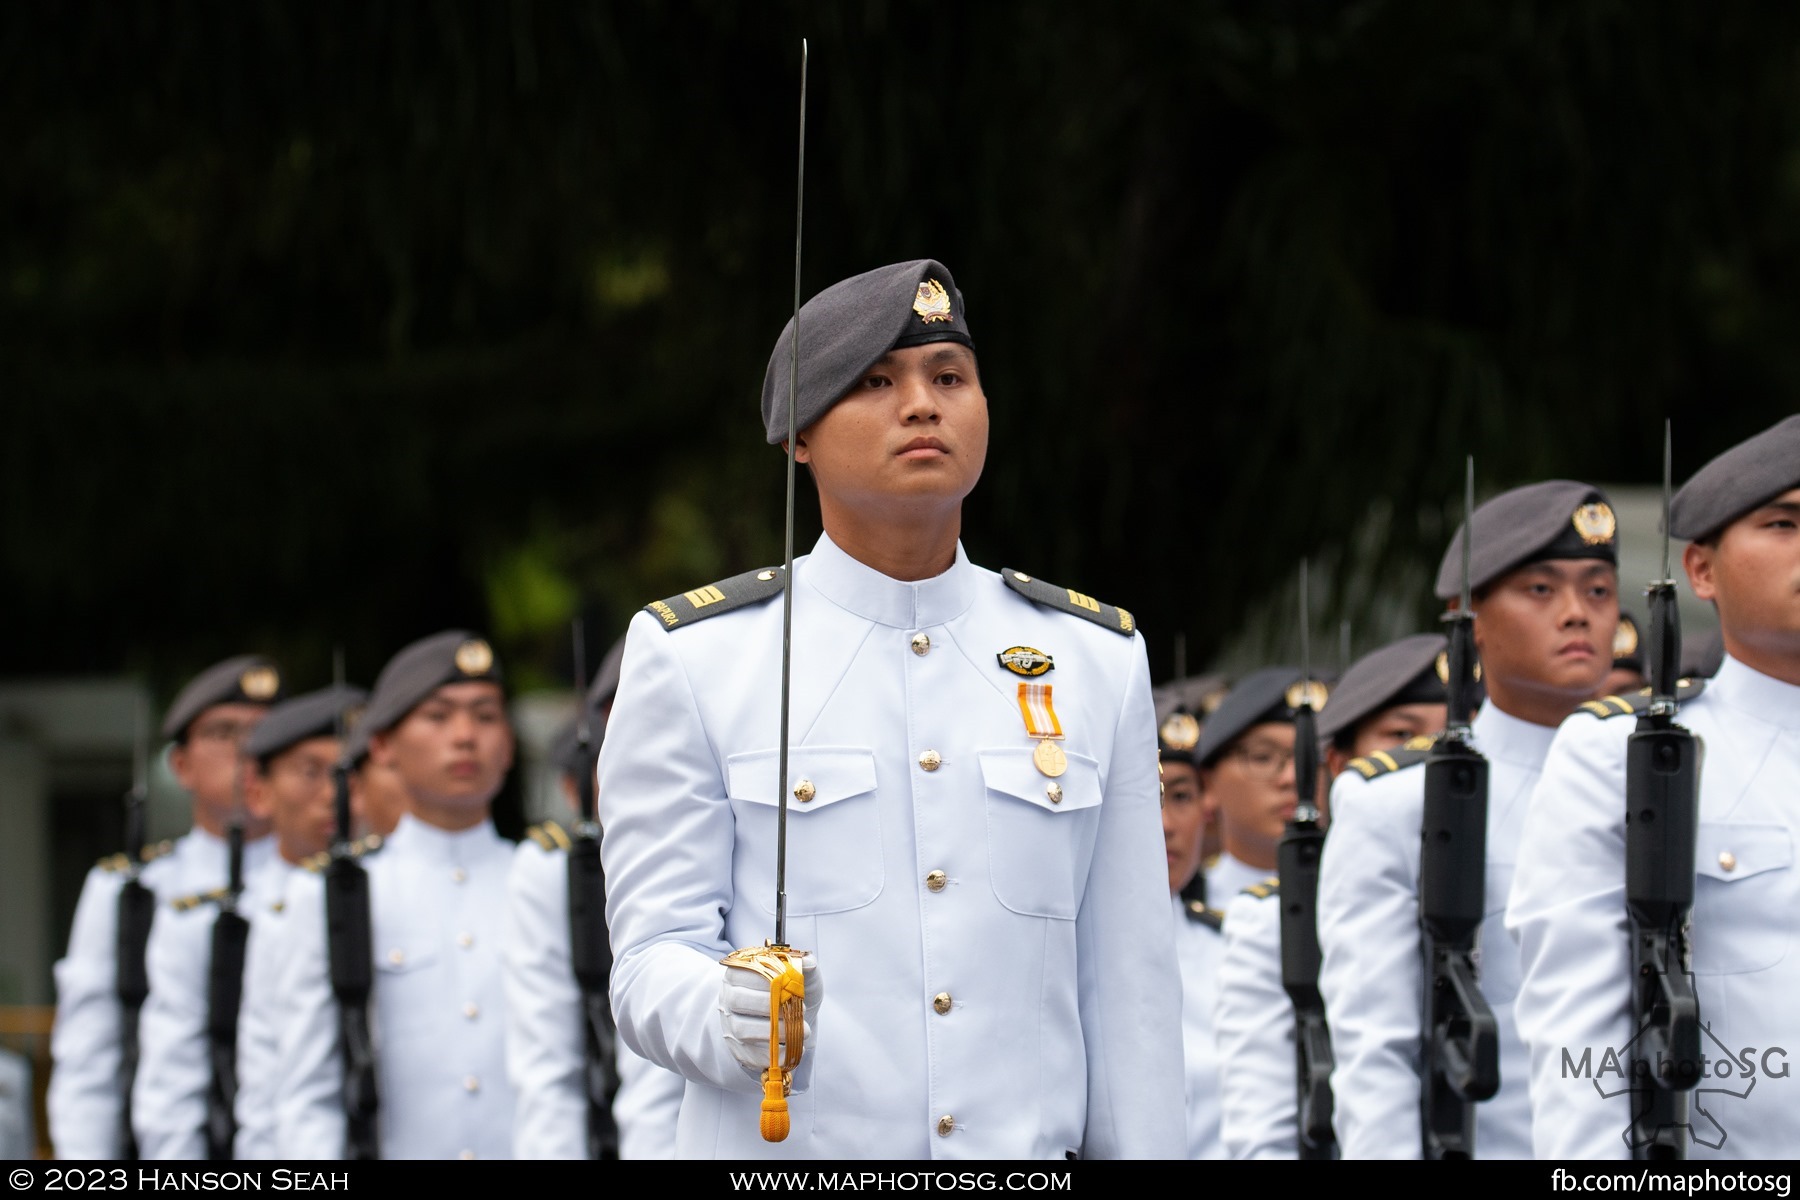 SAF's new service arm, the Digital Intelligence Service (DIS), takes part in NDP for the first time.